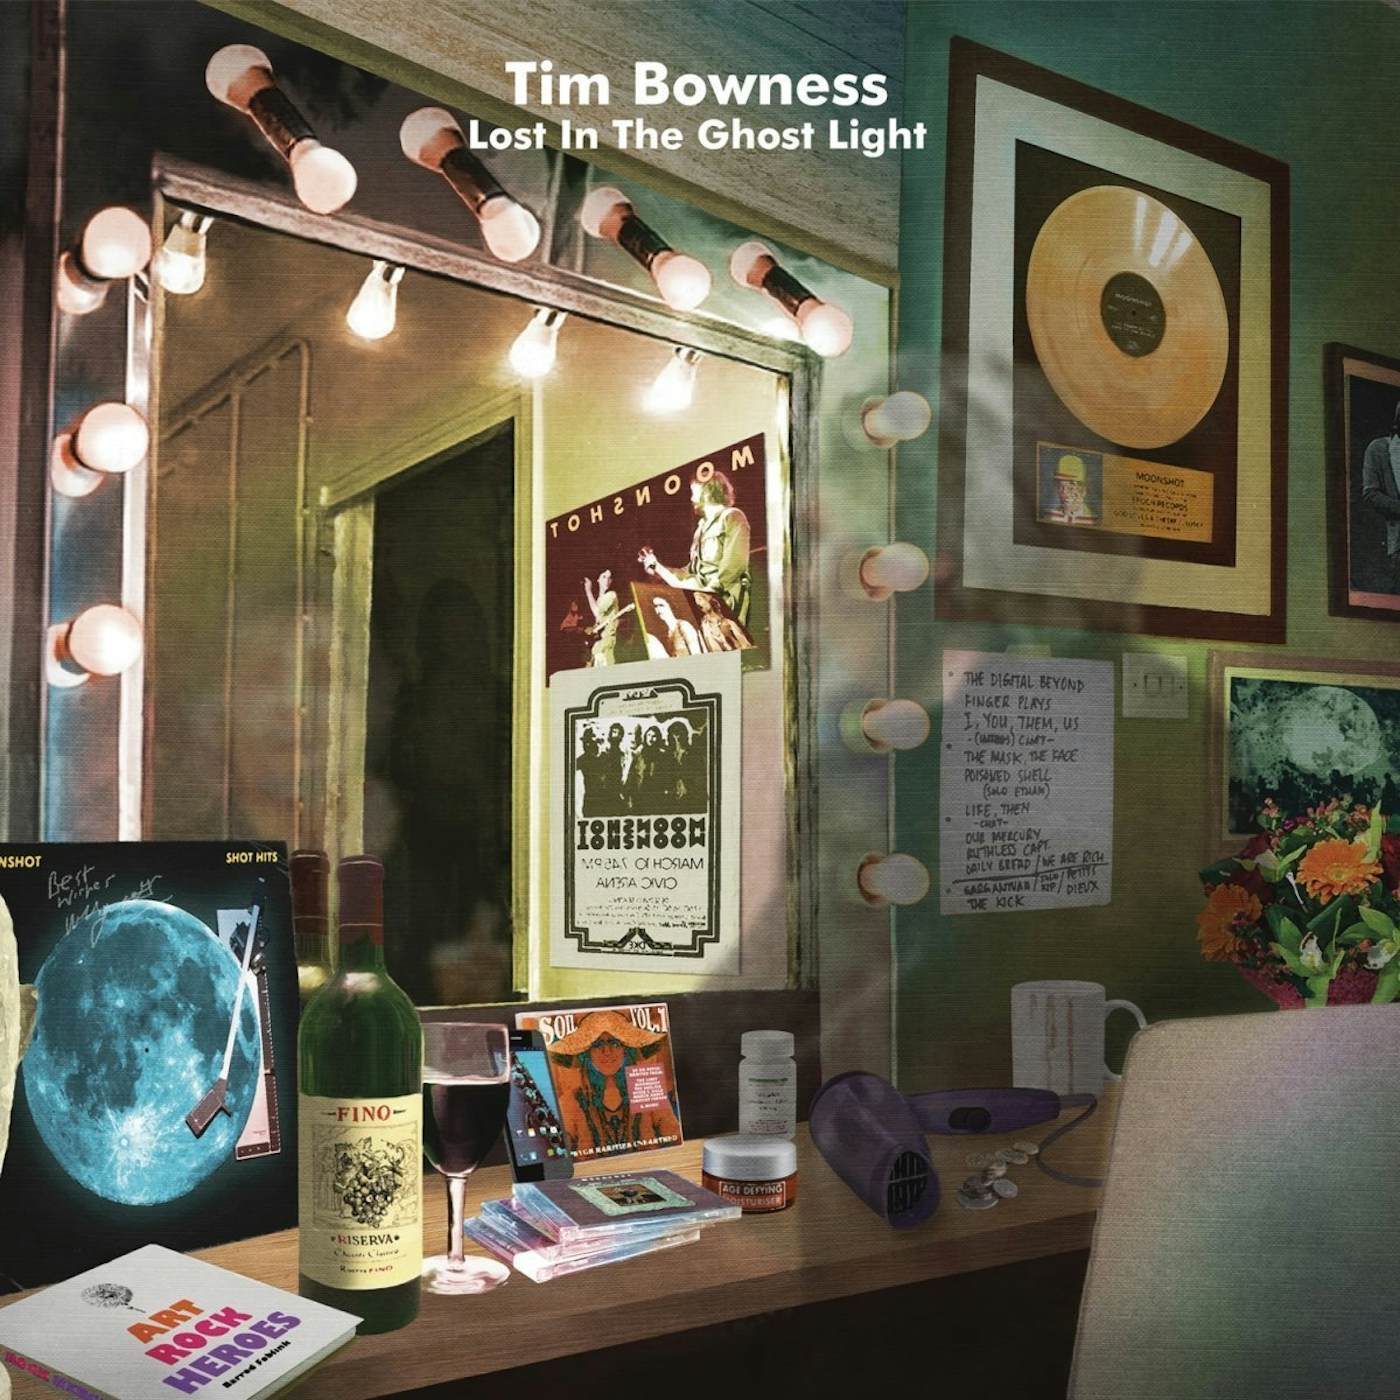 Tim Bowness Lost in the Ghost Light Vinyl Record